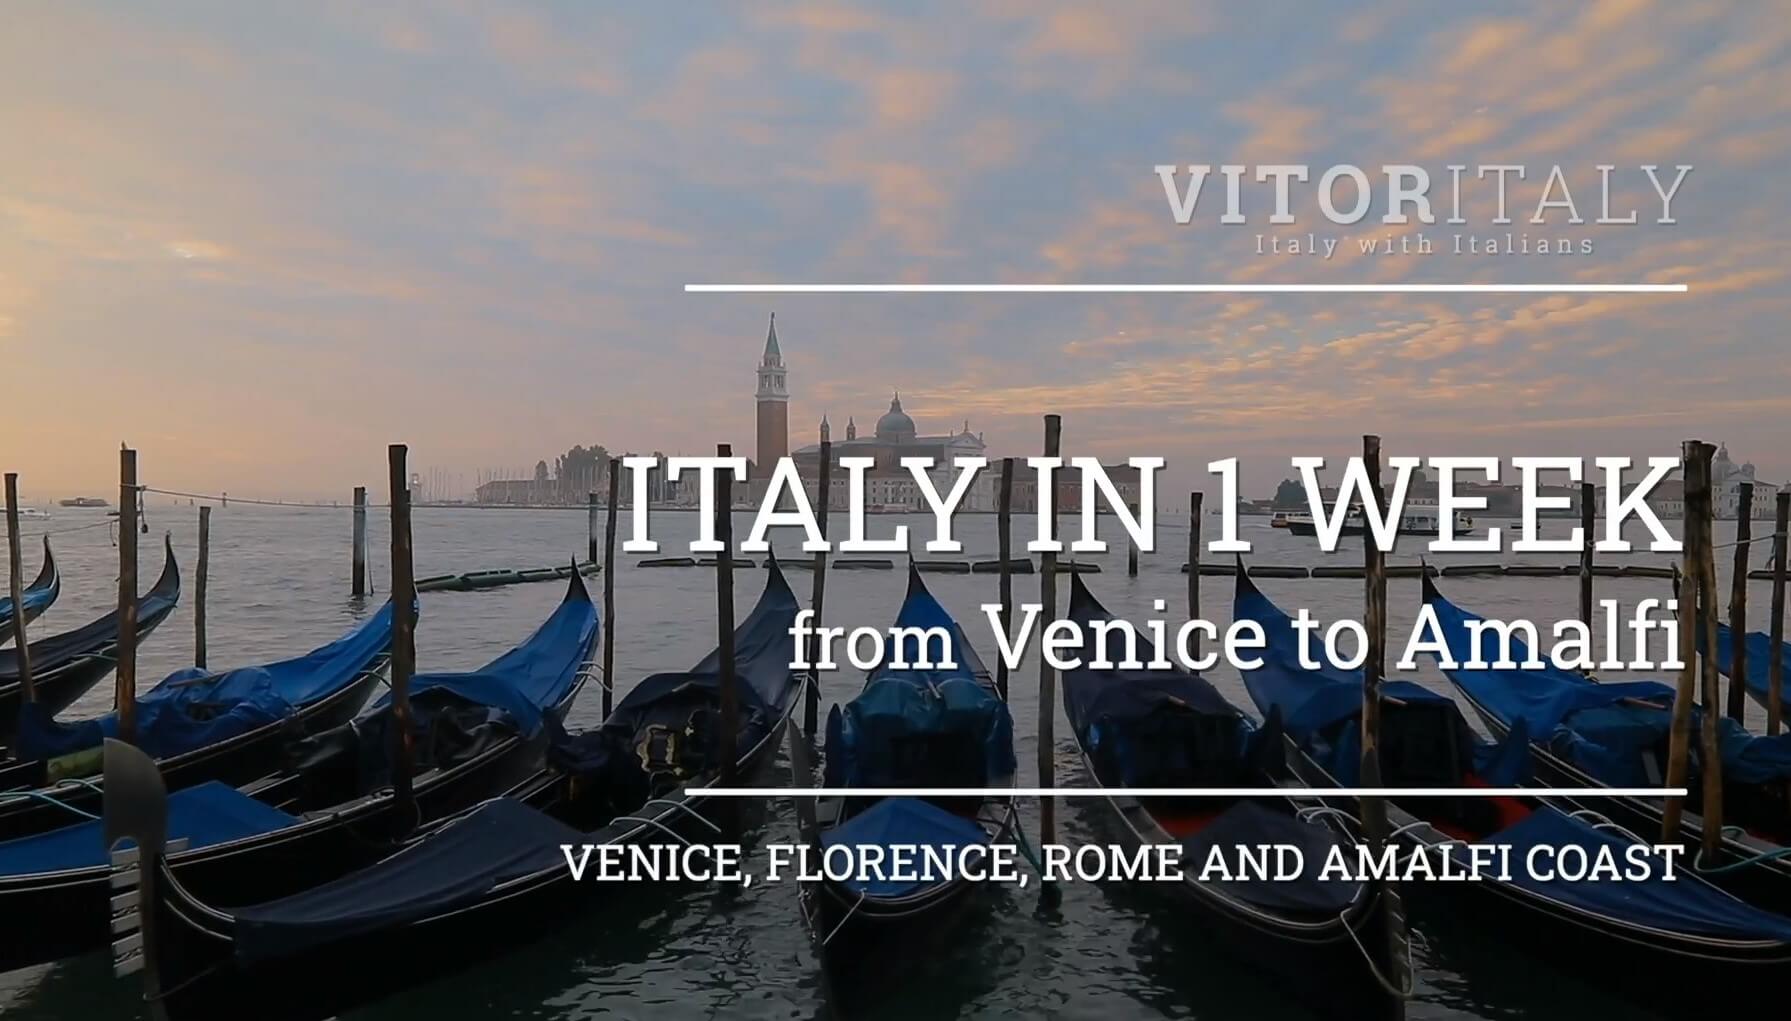 ITALY IN 1 WEEK PRIVATE TOUR - Venice, Florence, Rome and Amalfi Coast